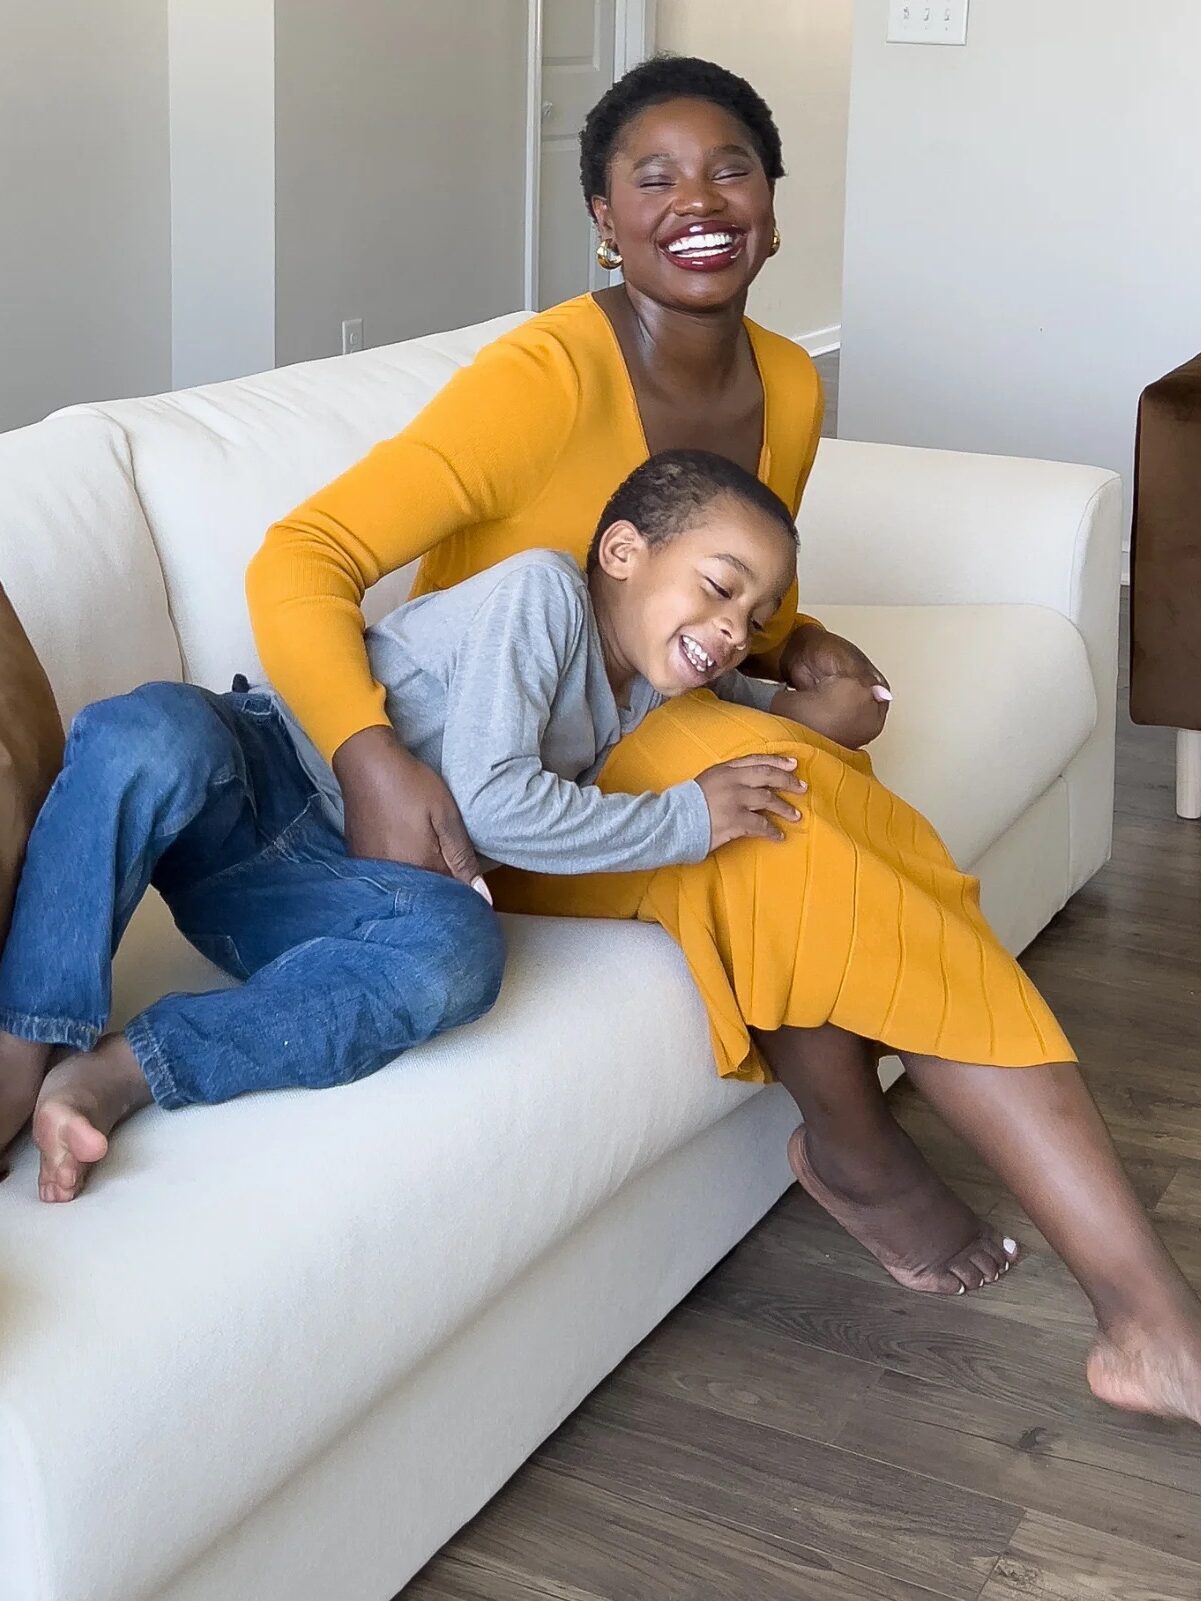 A woman in a yellow dress sits on a white couch, smiling and embracing a young boy who is laughing and leaning against her.